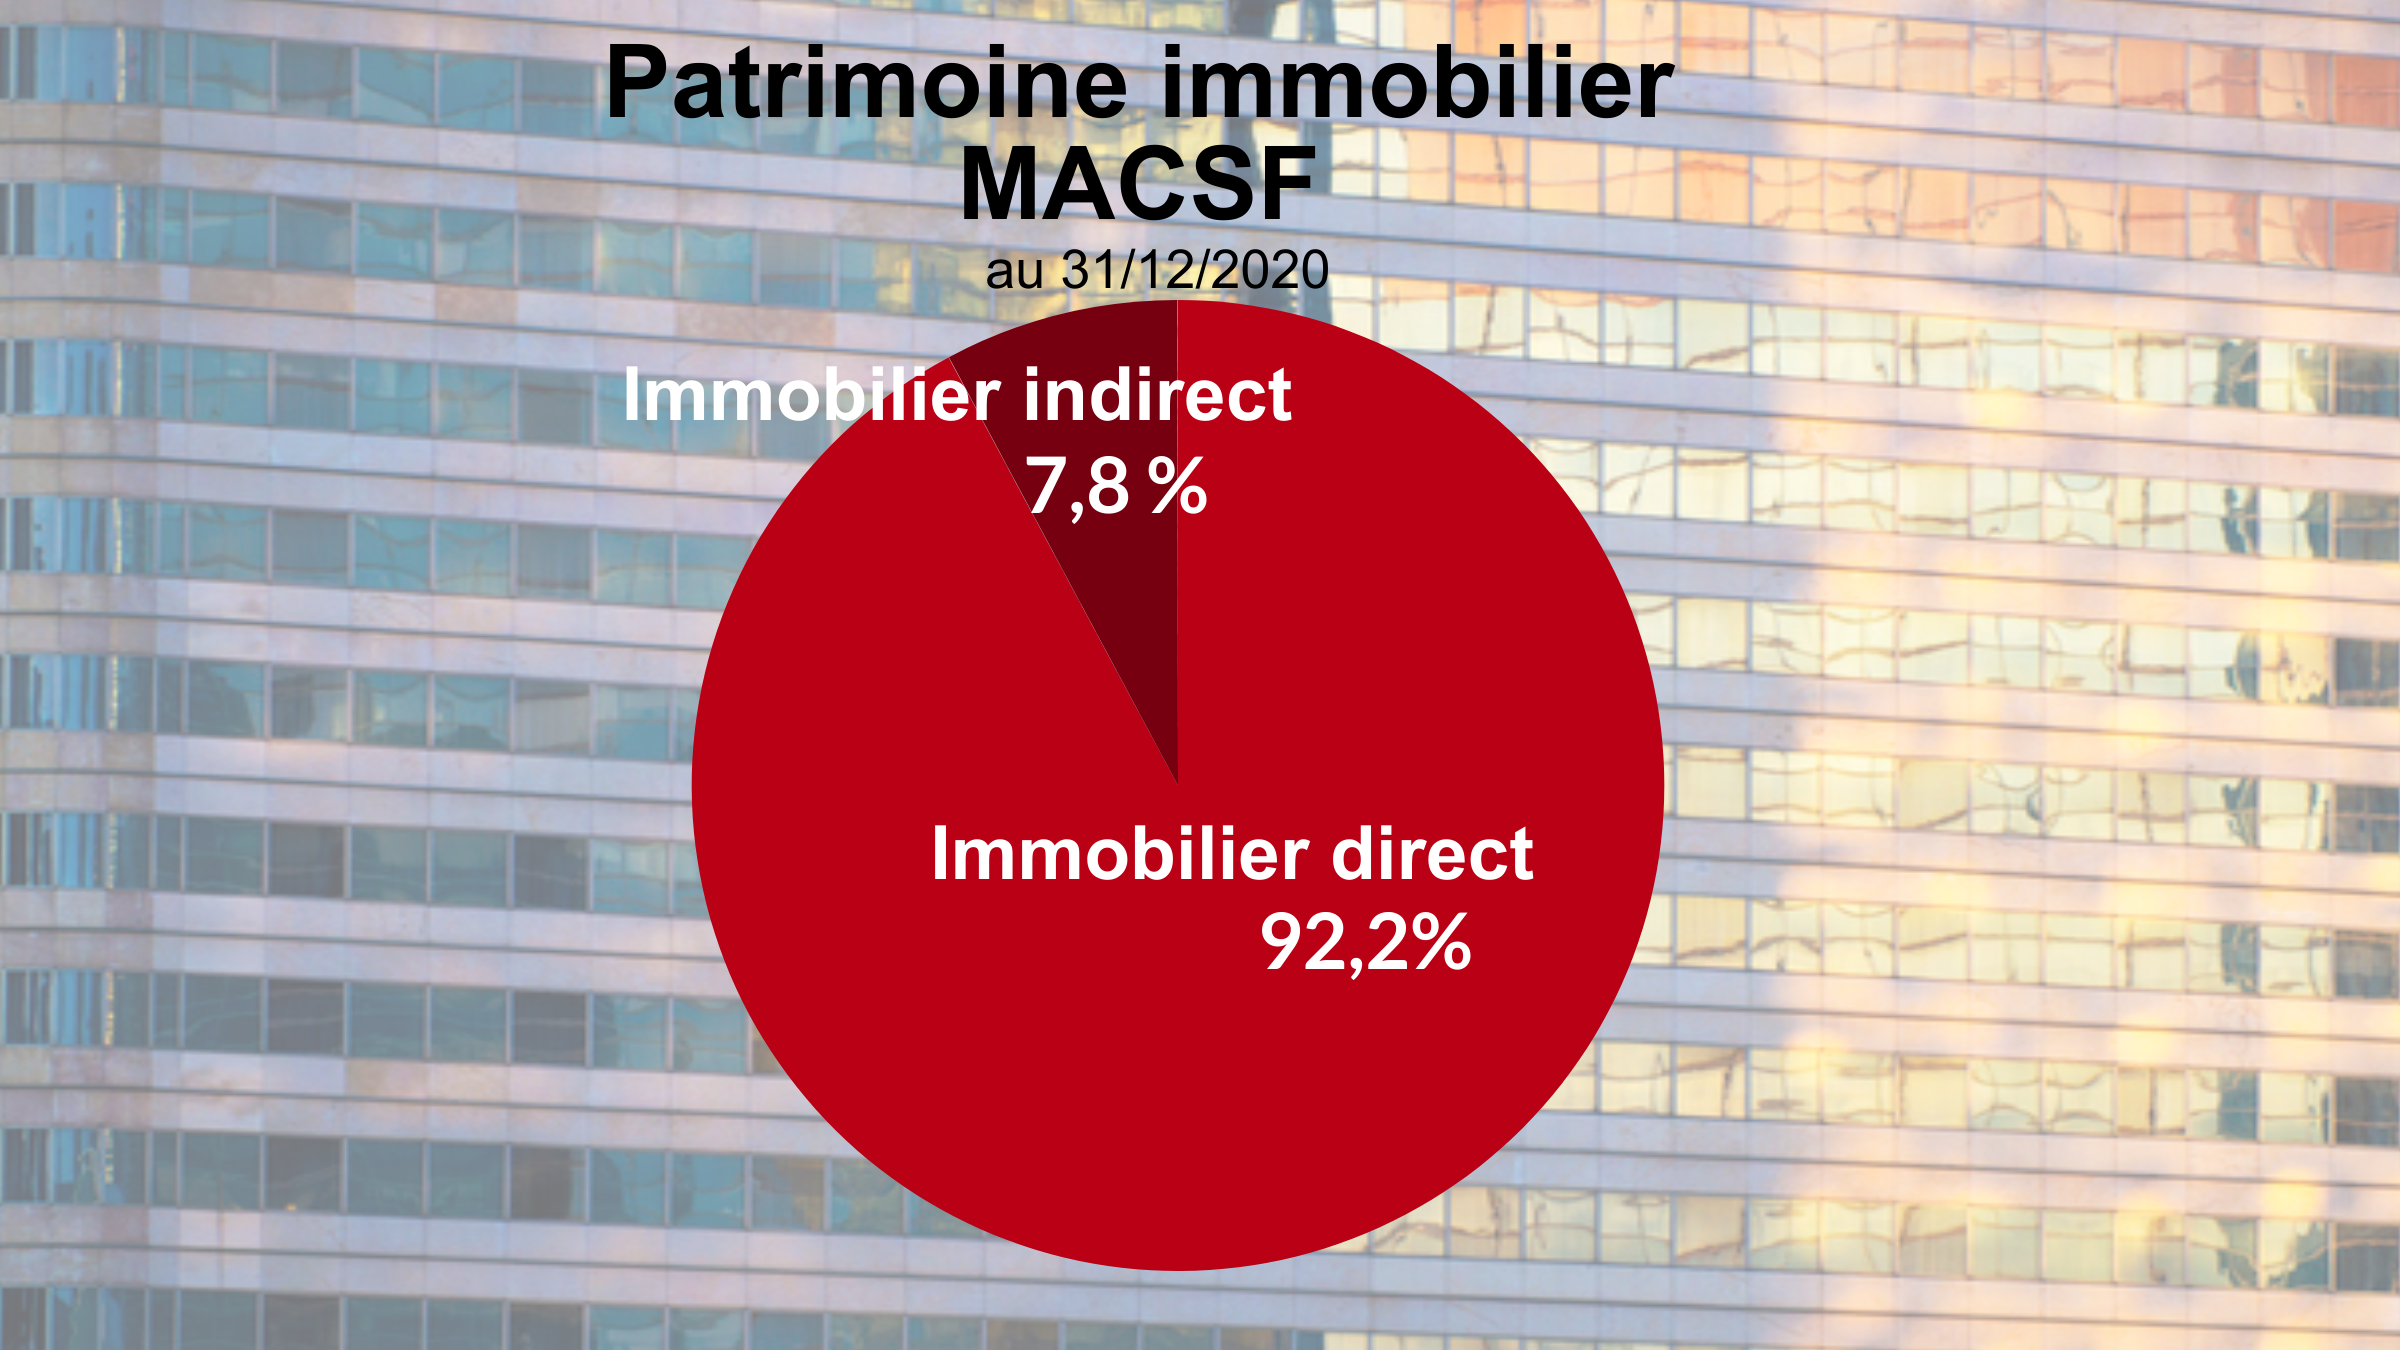 [INFOGRAPHIE] Immobilier MACSF direct et indirect